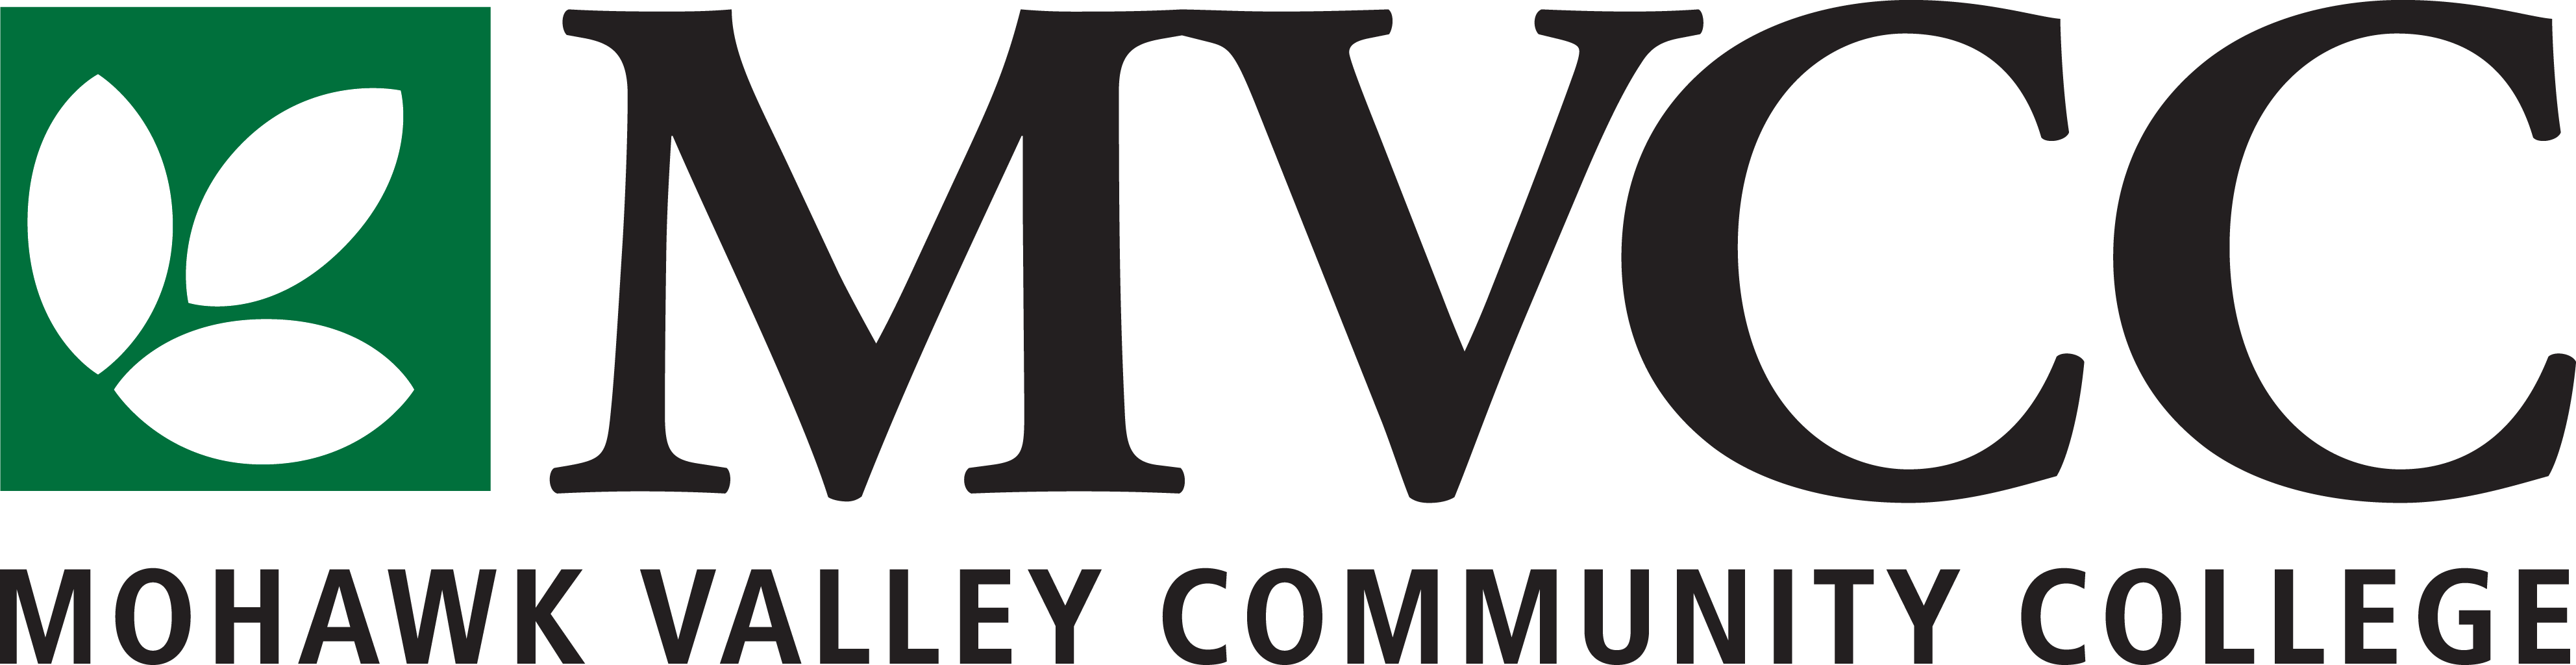 Mohawk Valley Community College post order